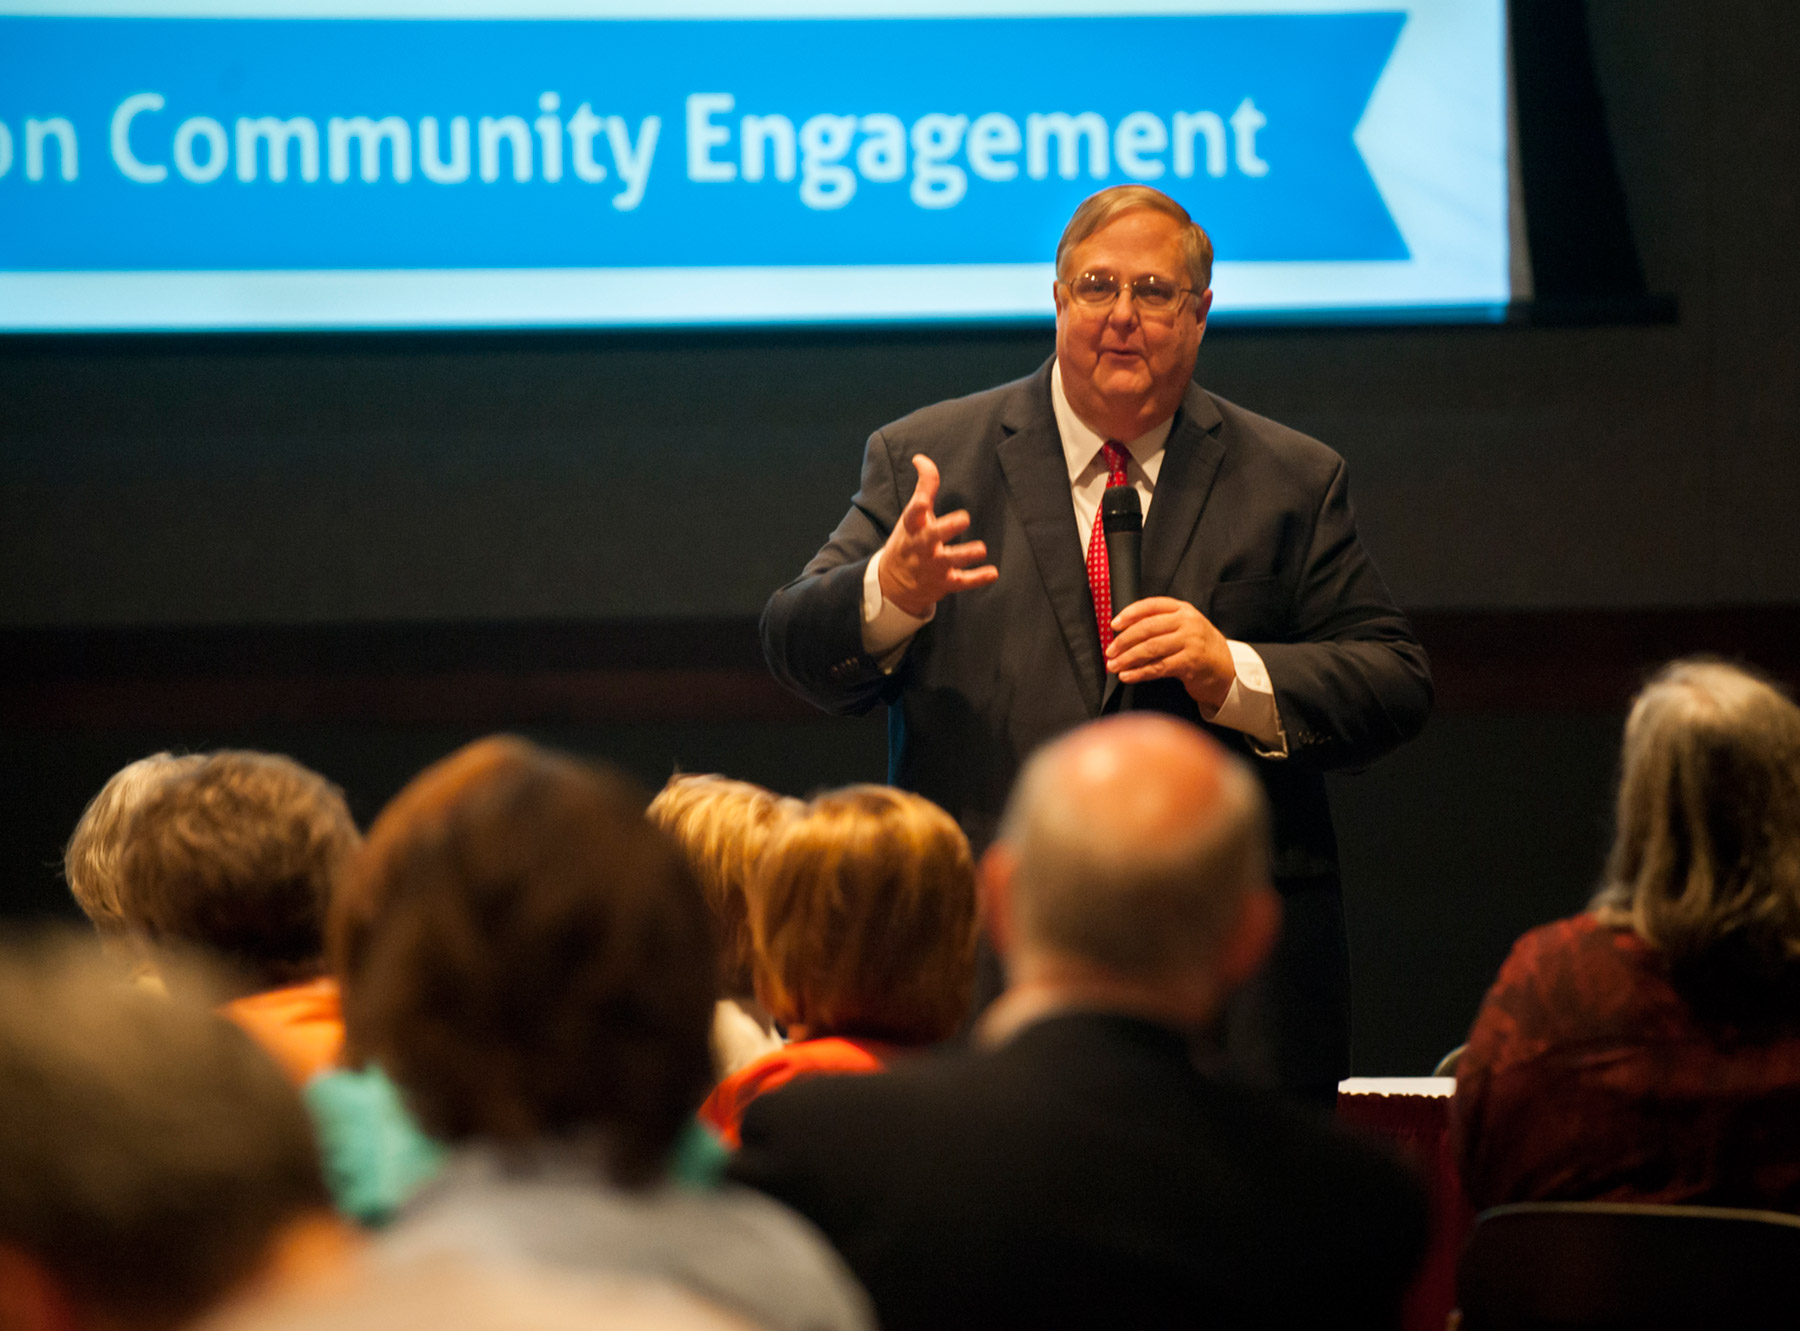 Blake Wilson, president of the Mississippi Economic Council, spoke to representatives of nonprofits from all over the state Wednesday [August 12] during the 2015 President’s Summit on Community Engagement. (Photo by Sarah Tewolde)